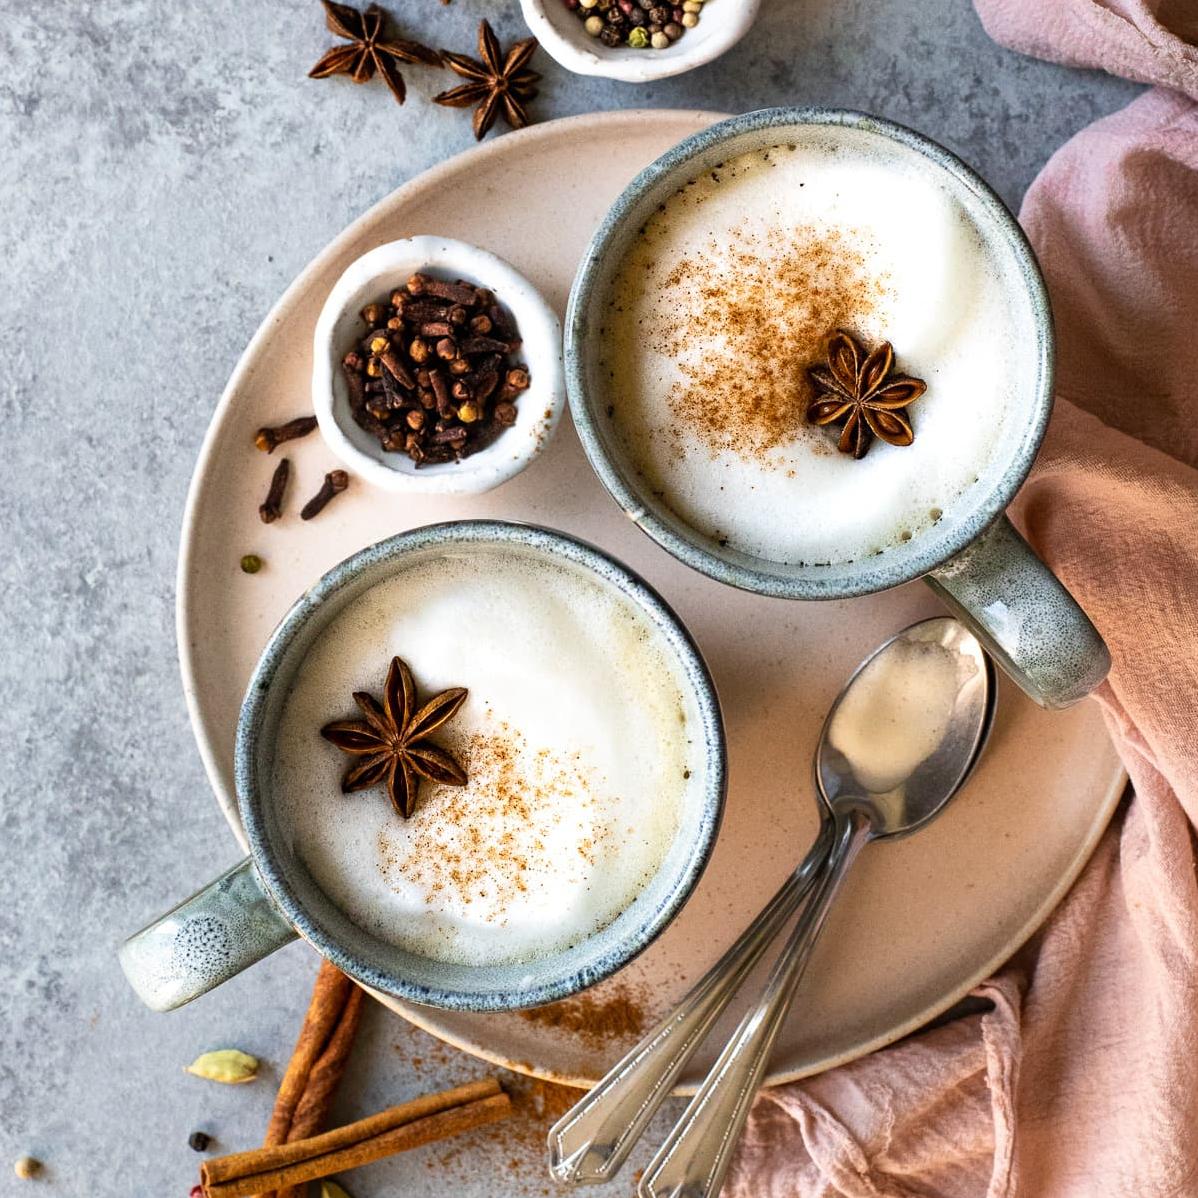  Fall in love with the aroma and taste of this Chai Latte.